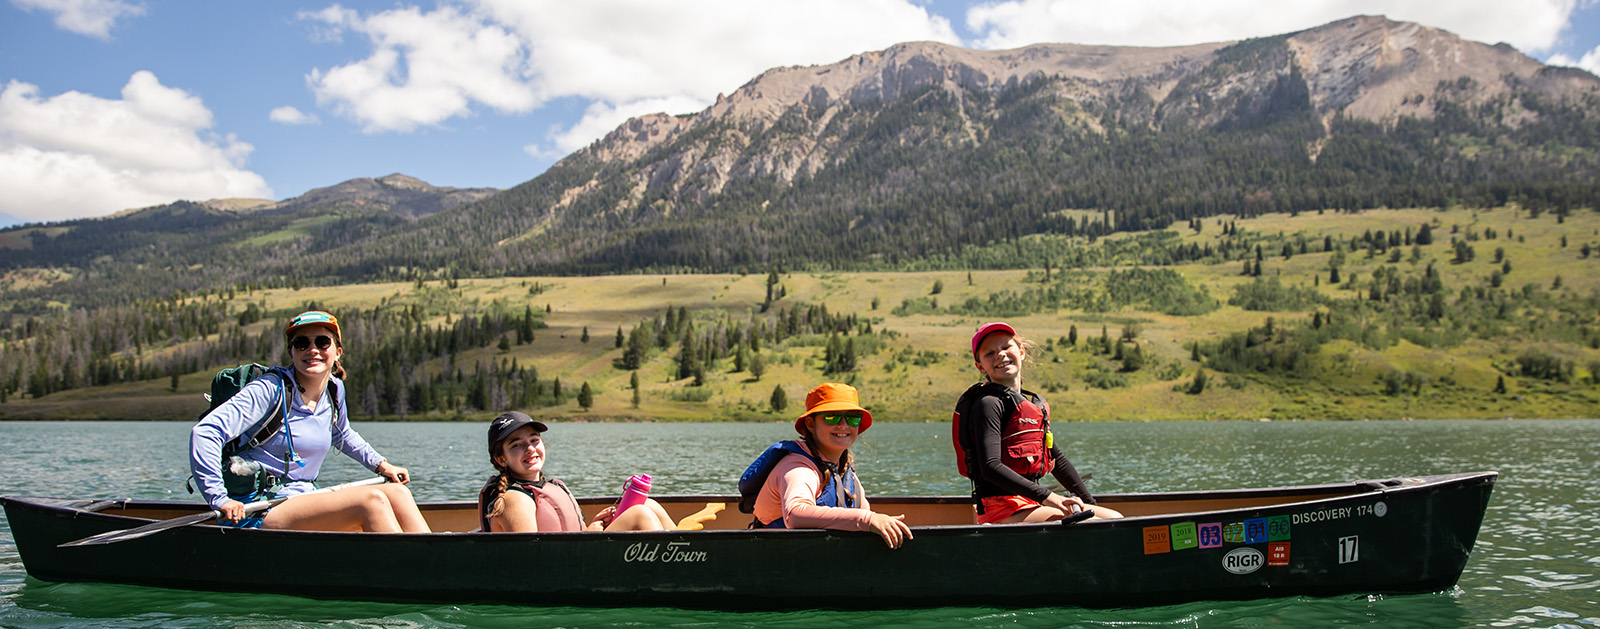 Four campers paddling in a canoe on a lake.